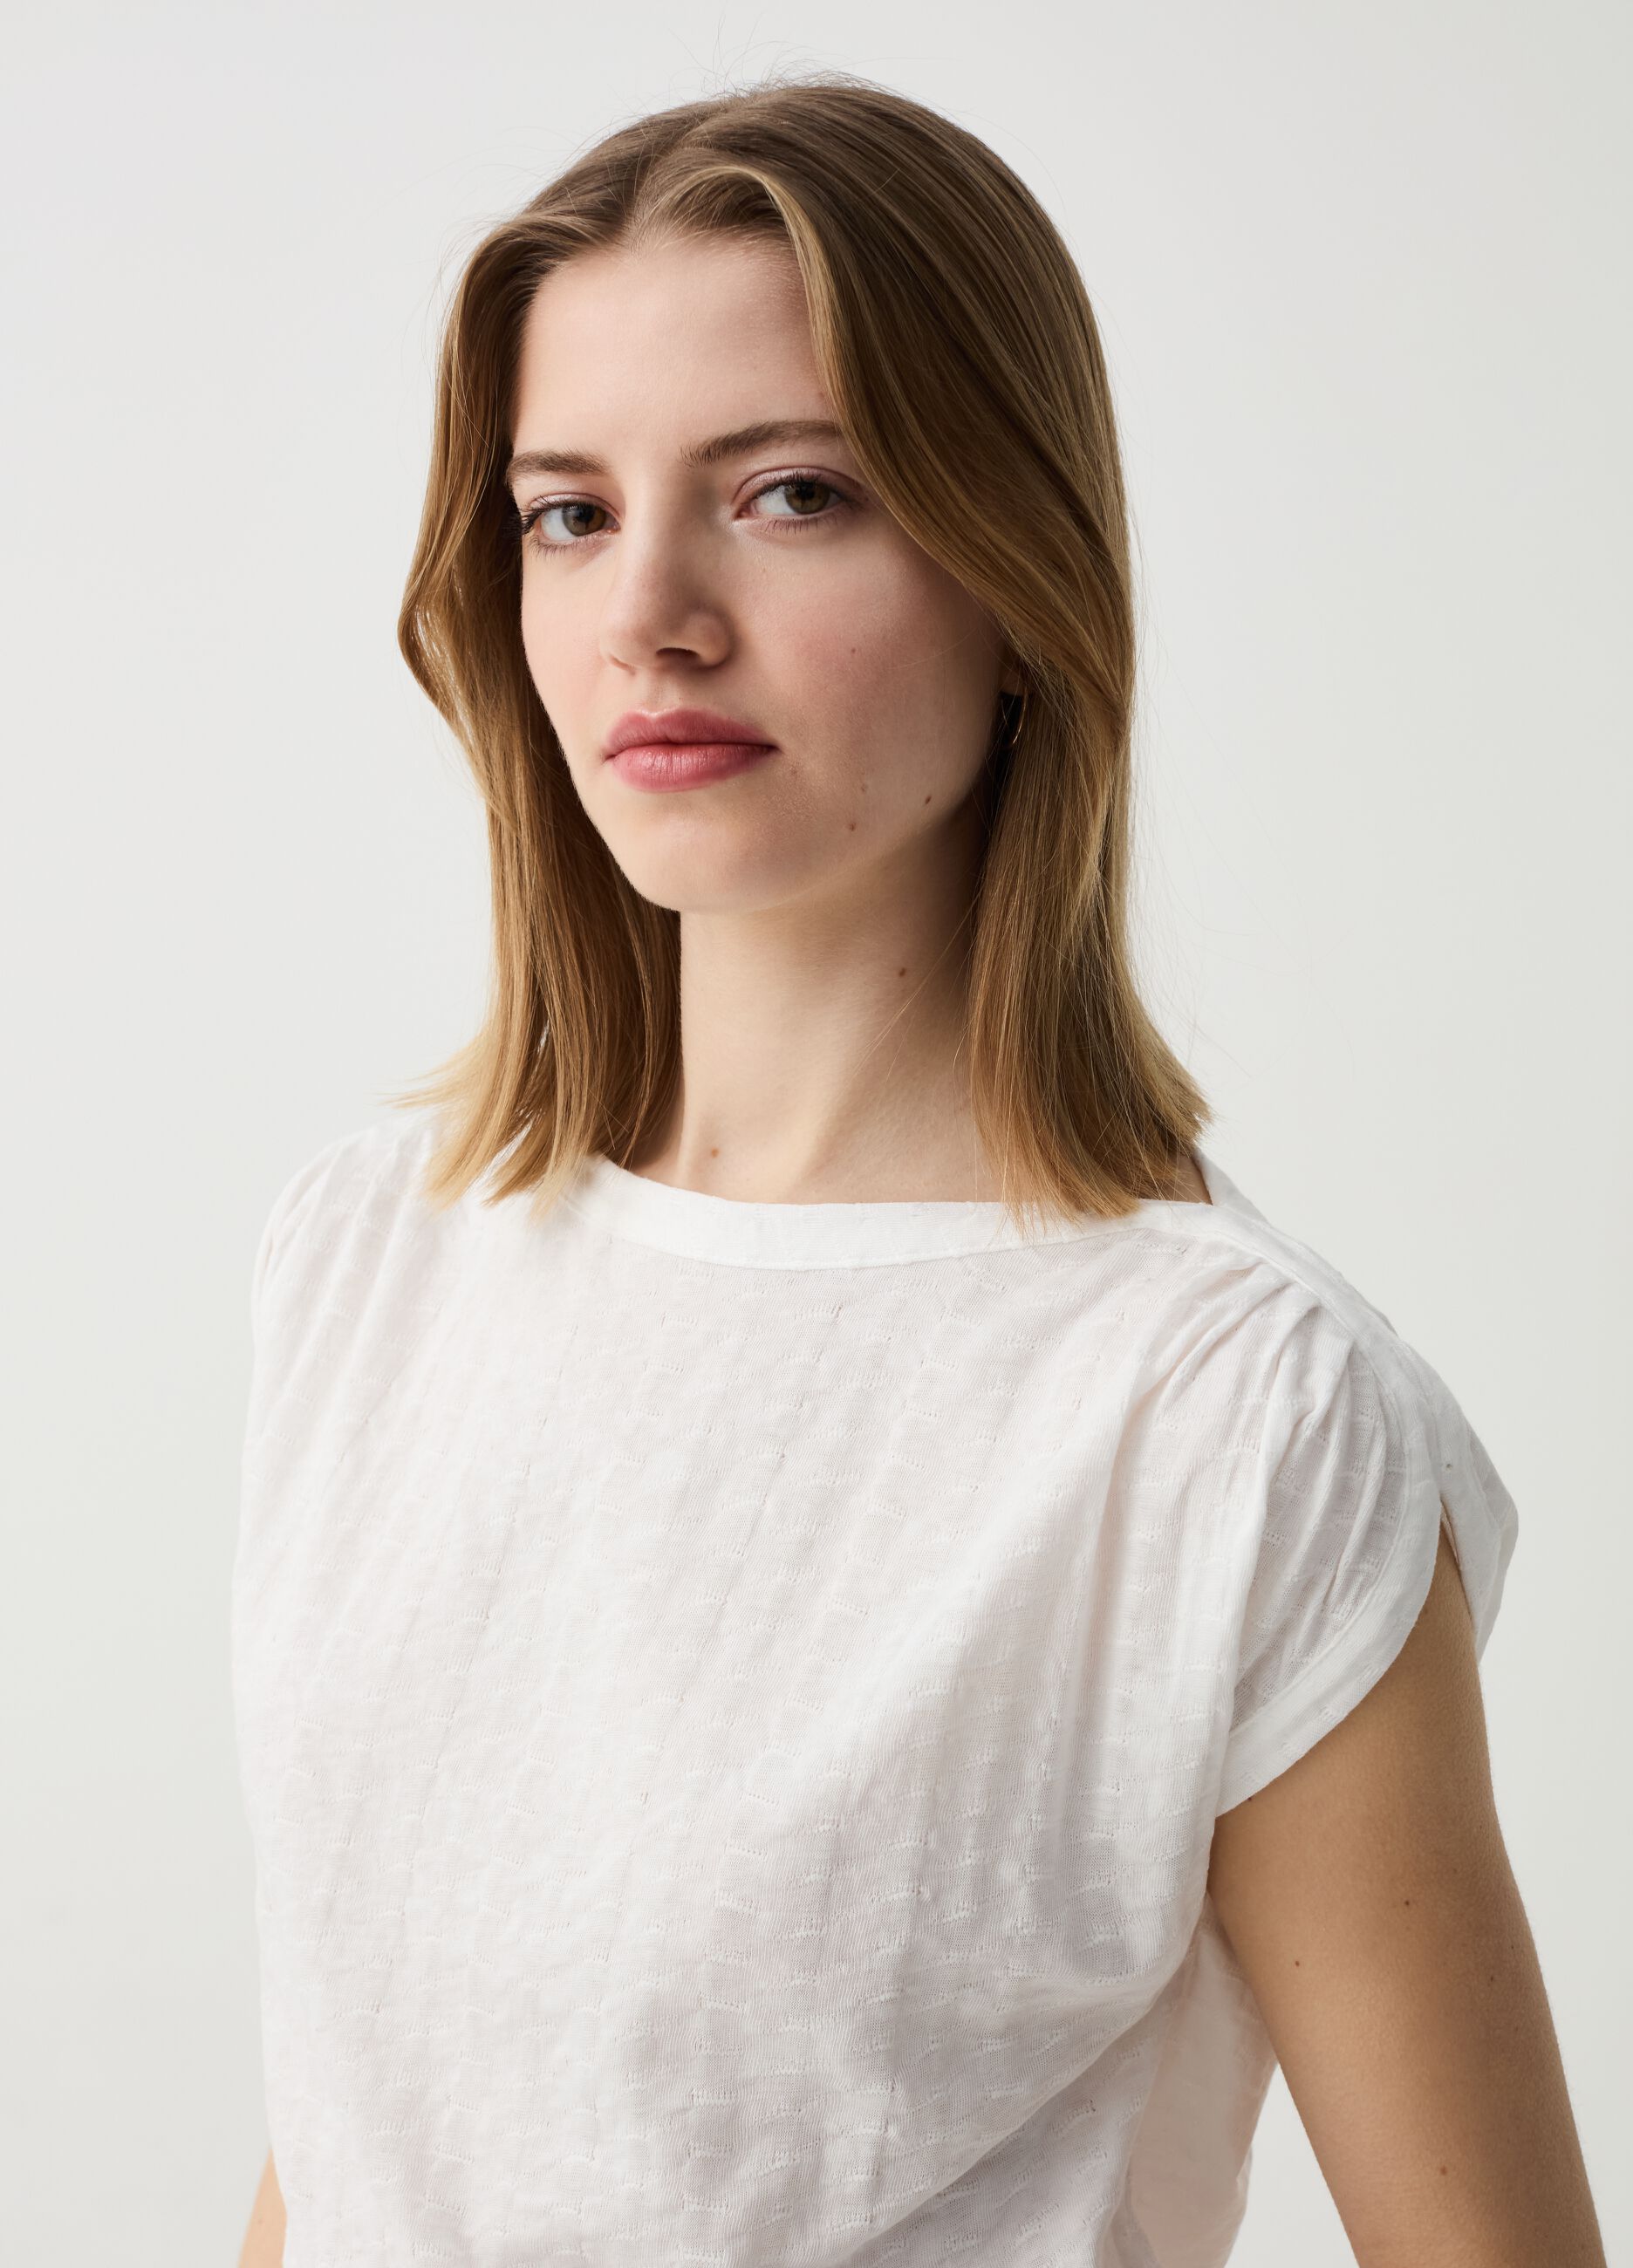 Sleeveless top in jersey with woven texture